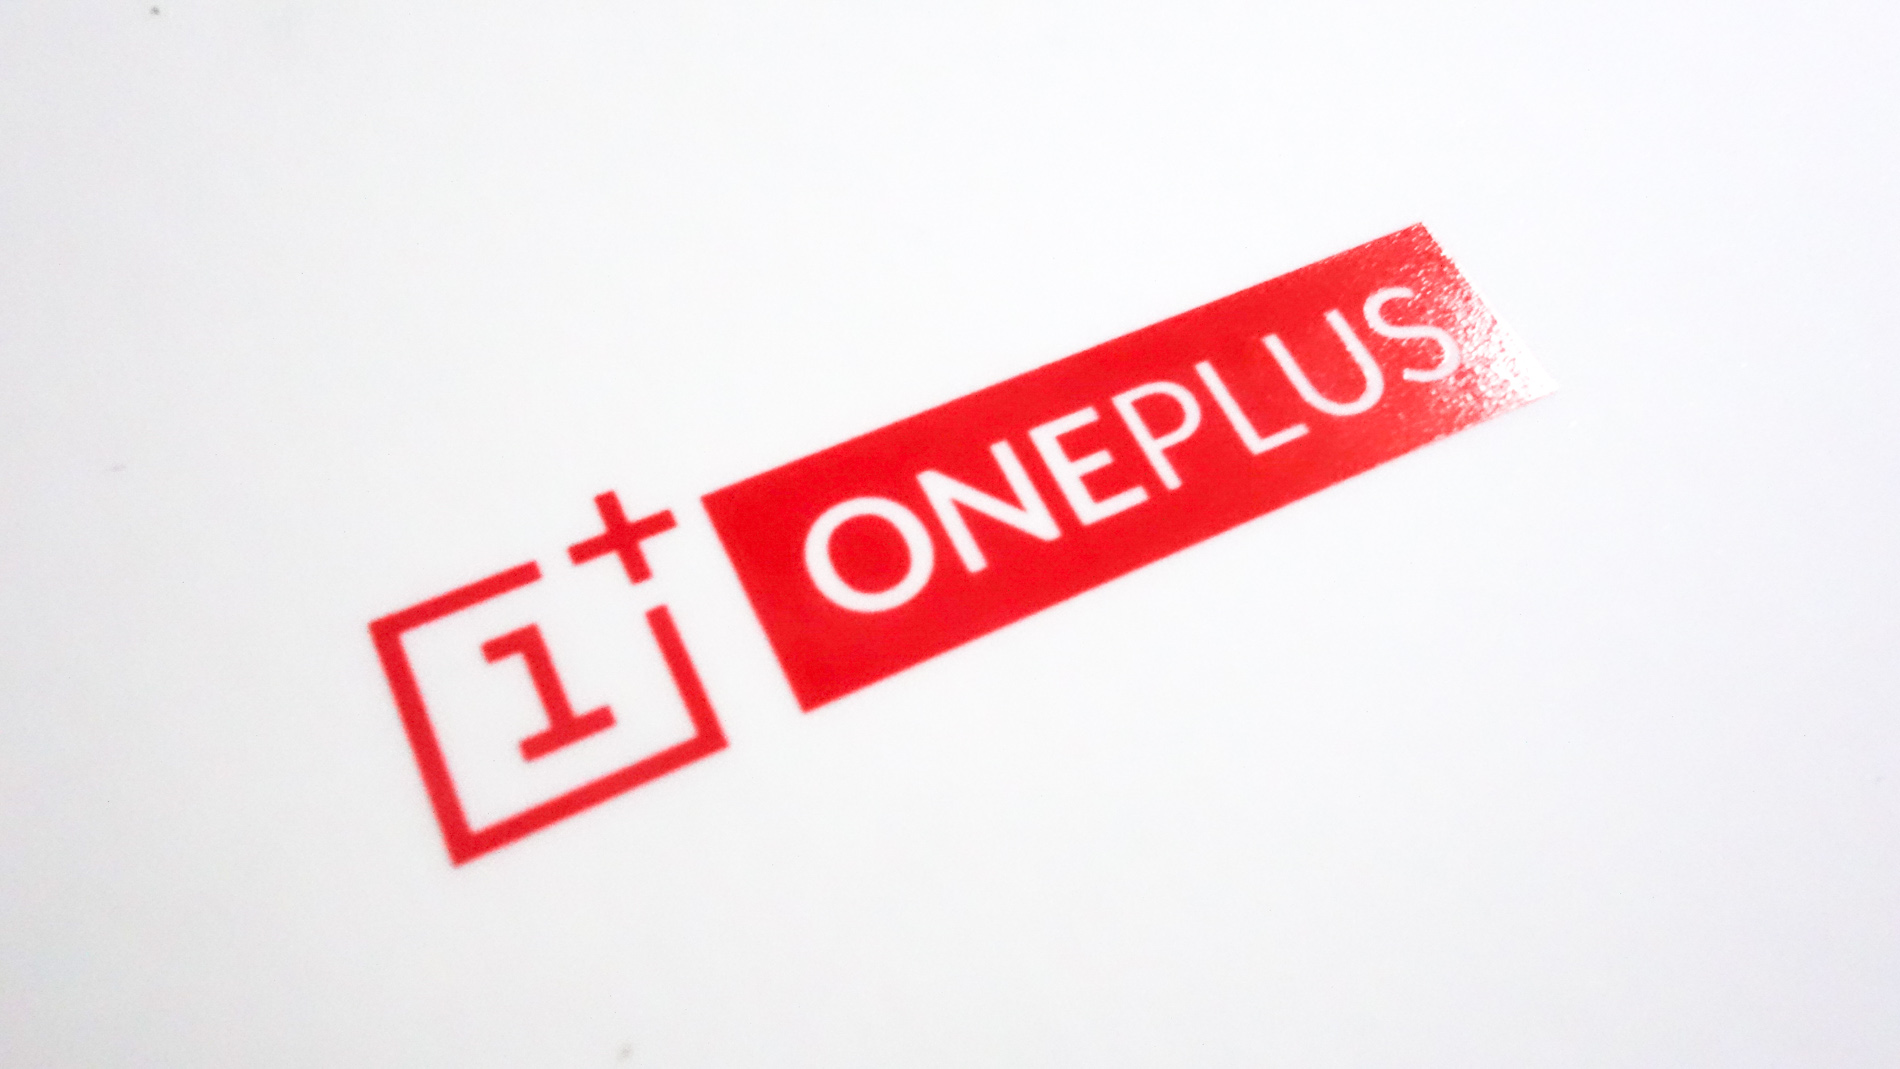 [UPDATE] OnePlus 3 is coming, Launch on Jun 15, dropping invite system 1